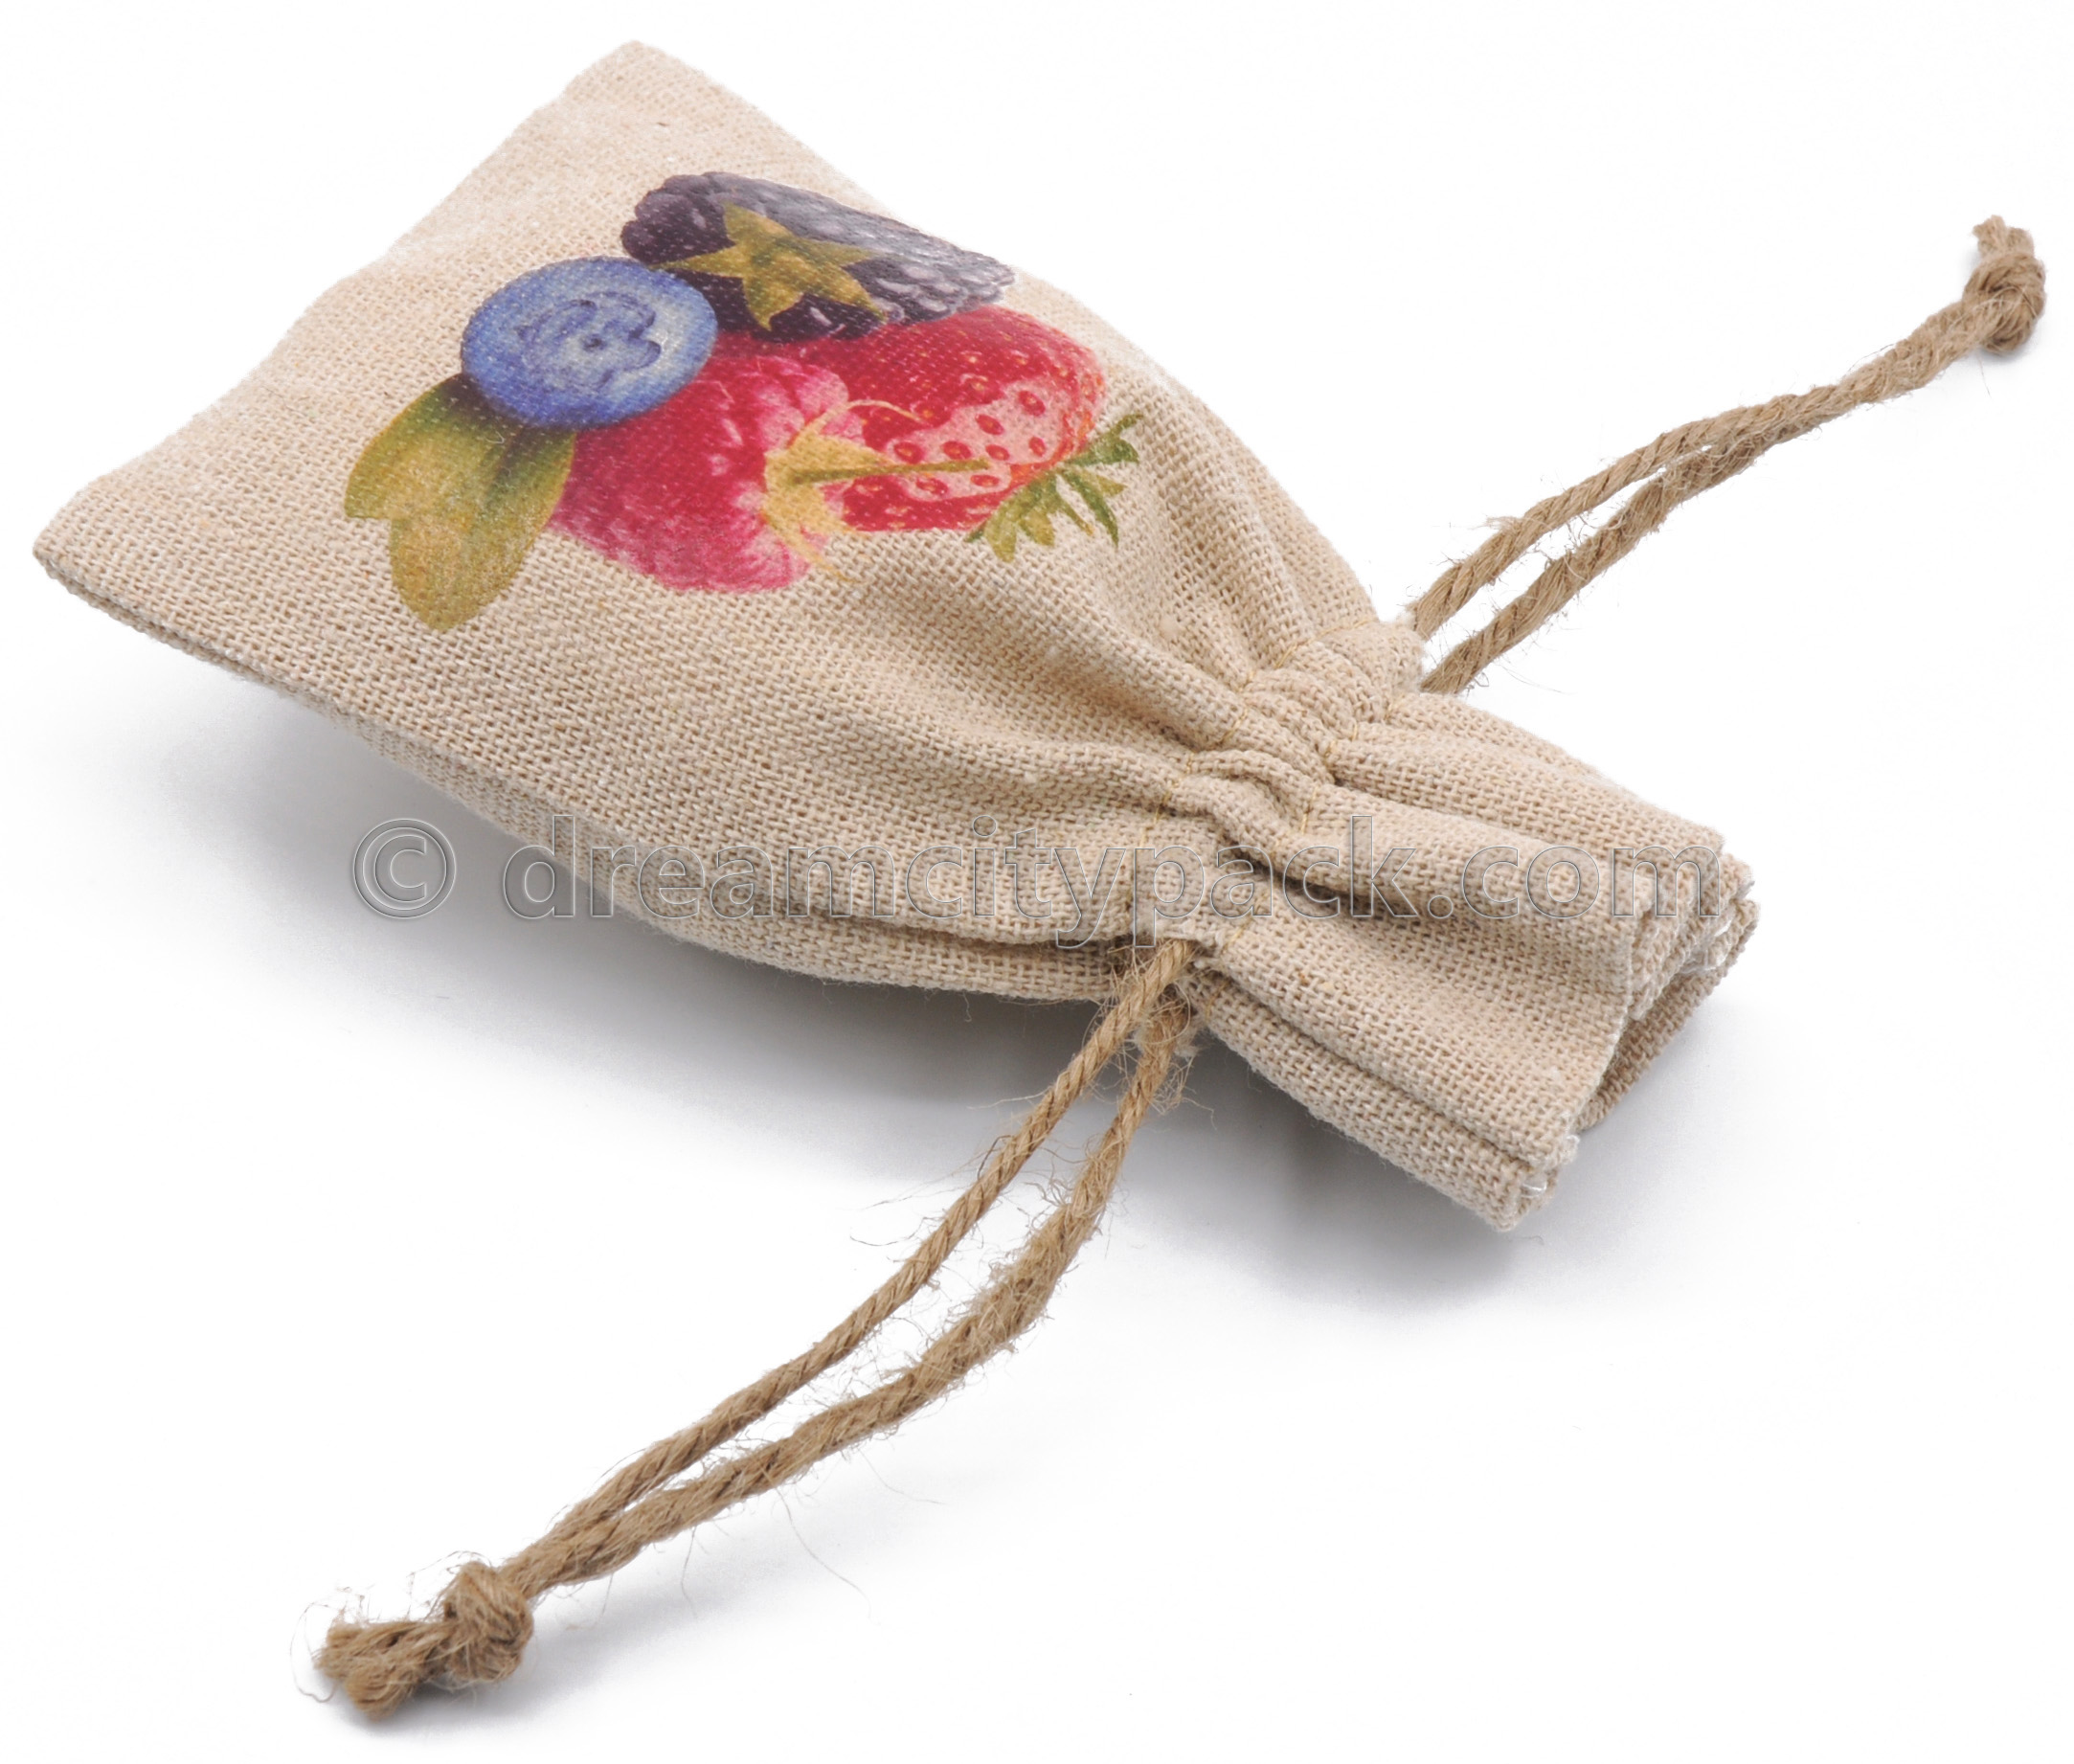 Personalised Linen Drawstring Favor Bags Gift Pouches with Multicolored Logo